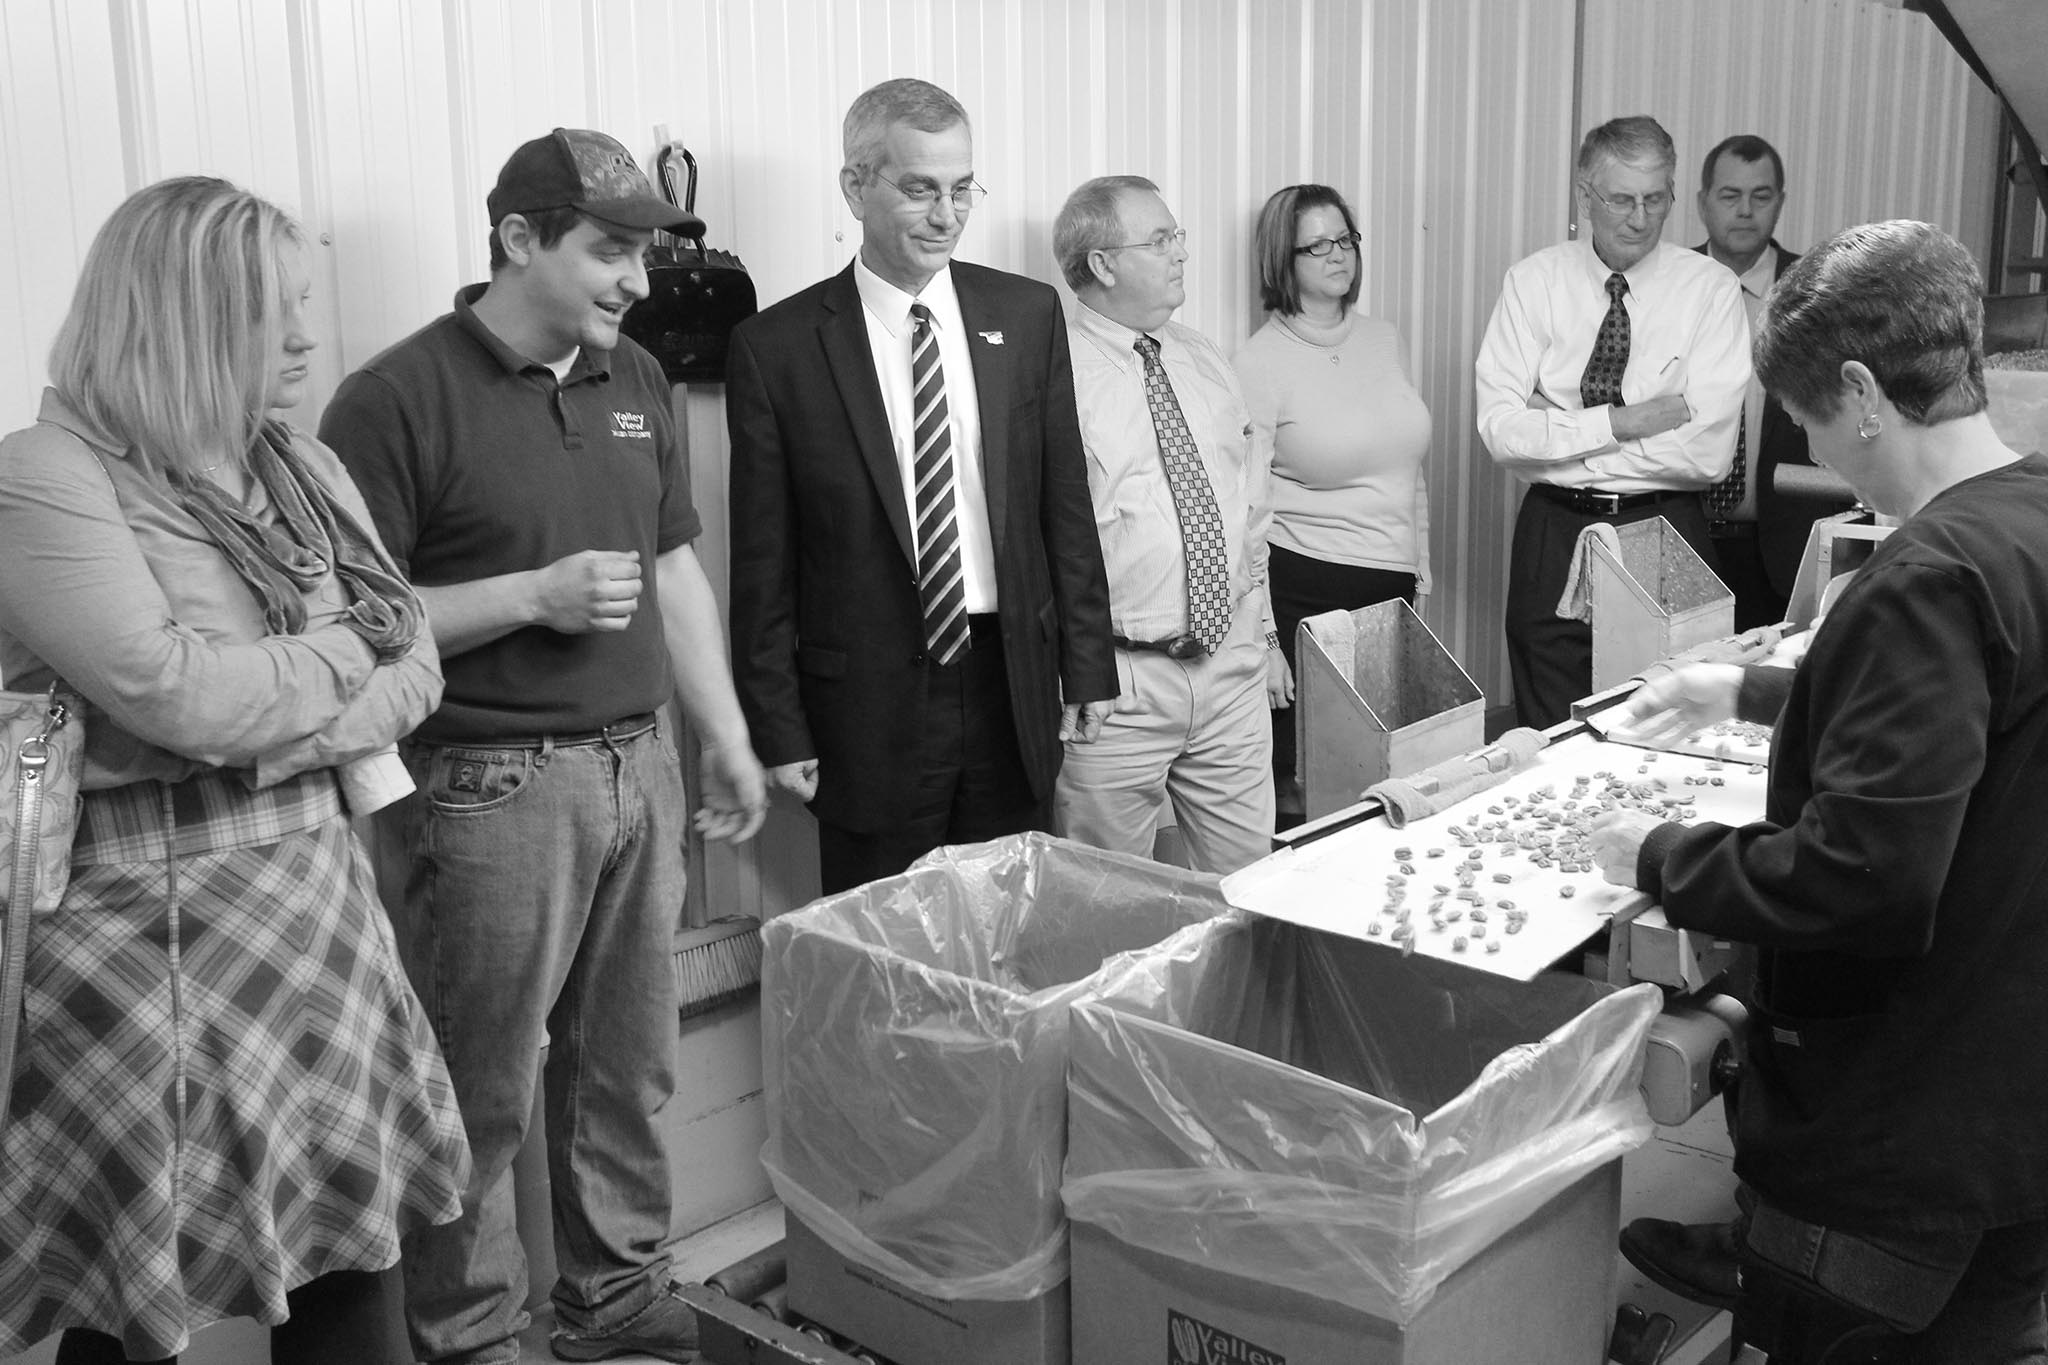 Oklahoma Farm Bureau member Josh Grundmann (second from left) shares the process of cleaning and shelling pecans with the Oklahoma State Board of Agriculture during a tour in 2013. The Grundmann family hosted the group at their business, Valley View Pecans near Earlsboro, to help educate board members about the pecan industry and issues pecan producers and processors face.